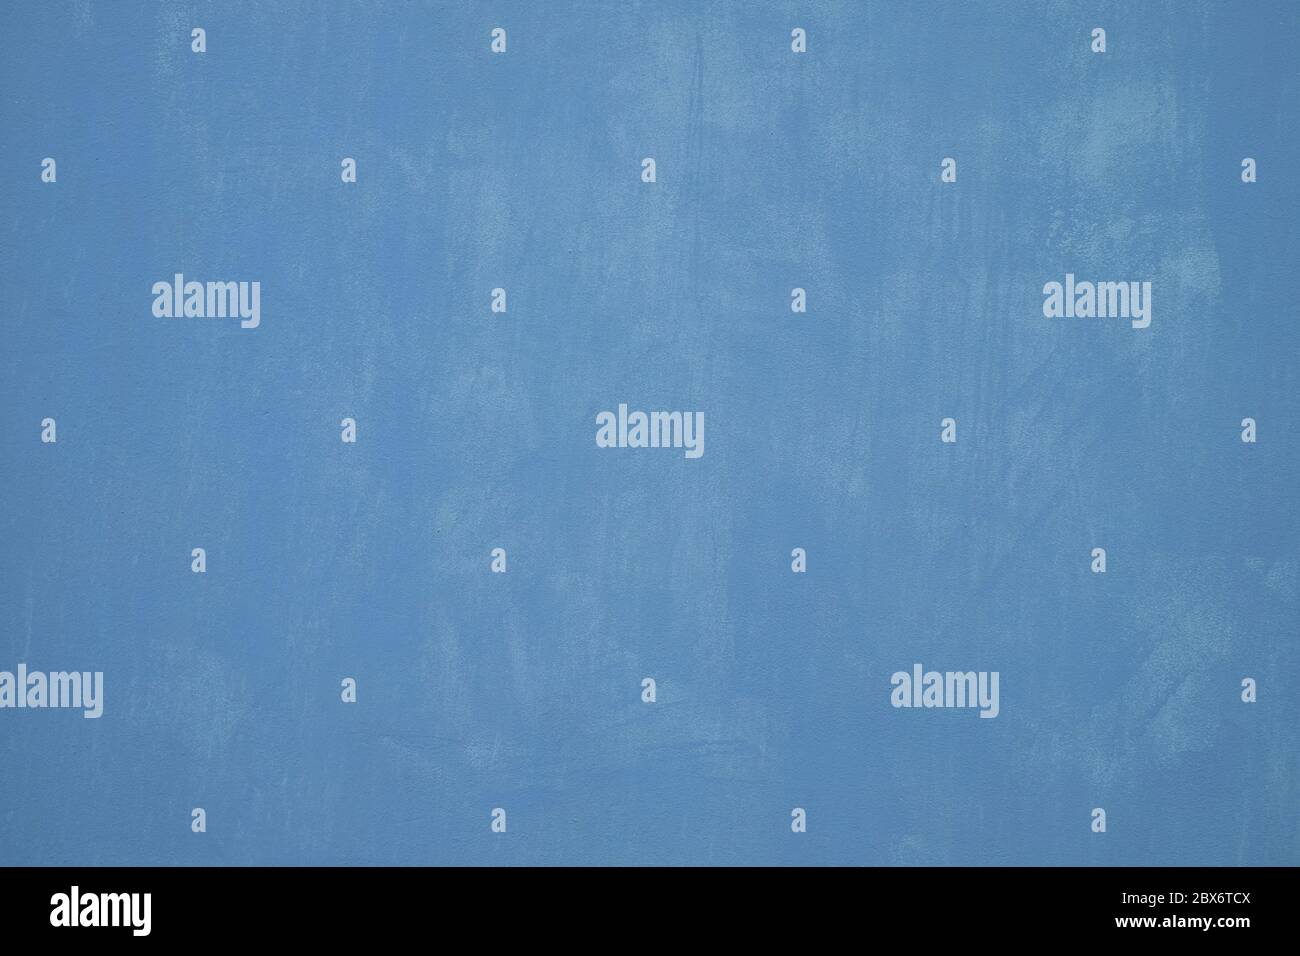 Subdued deep blue paint, empty graphic background element. Stock Photo